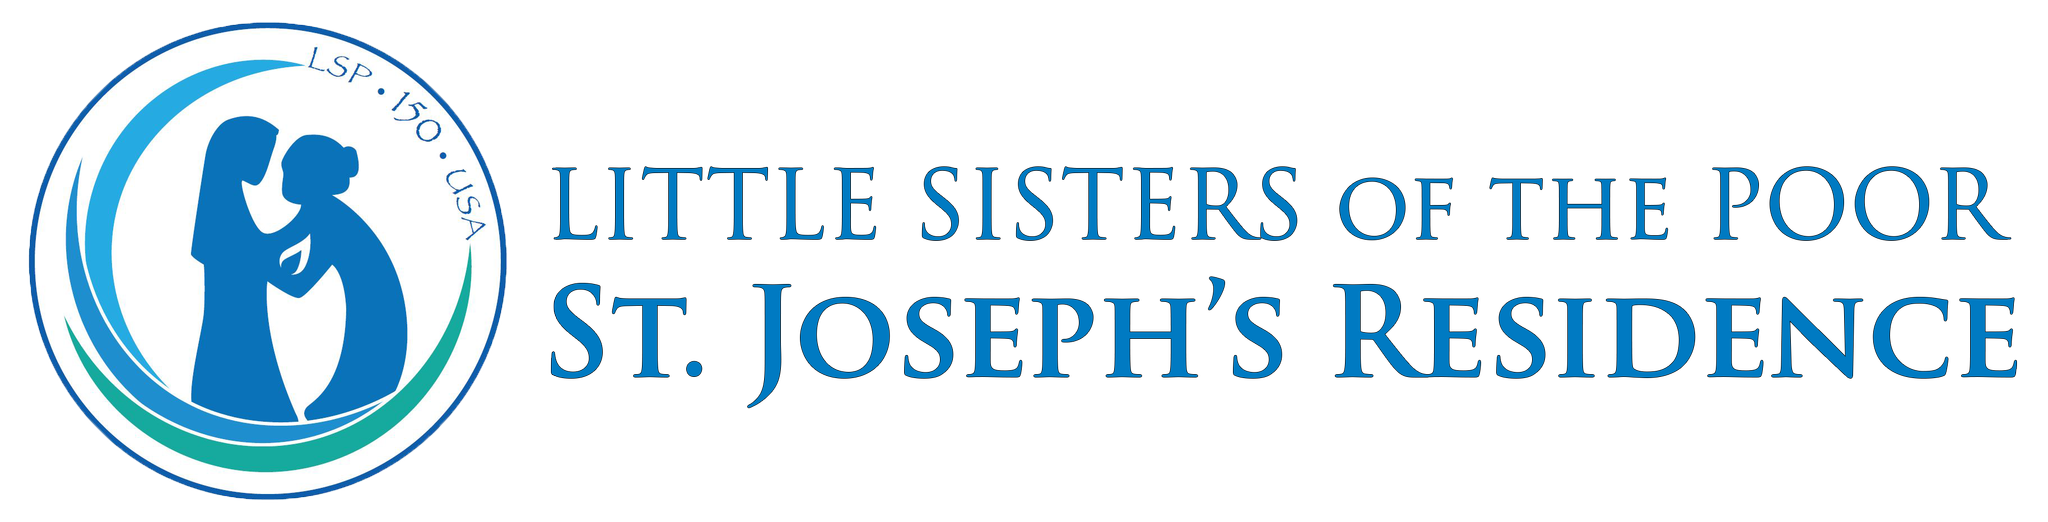 Little Sisters of the Poor Connecticut